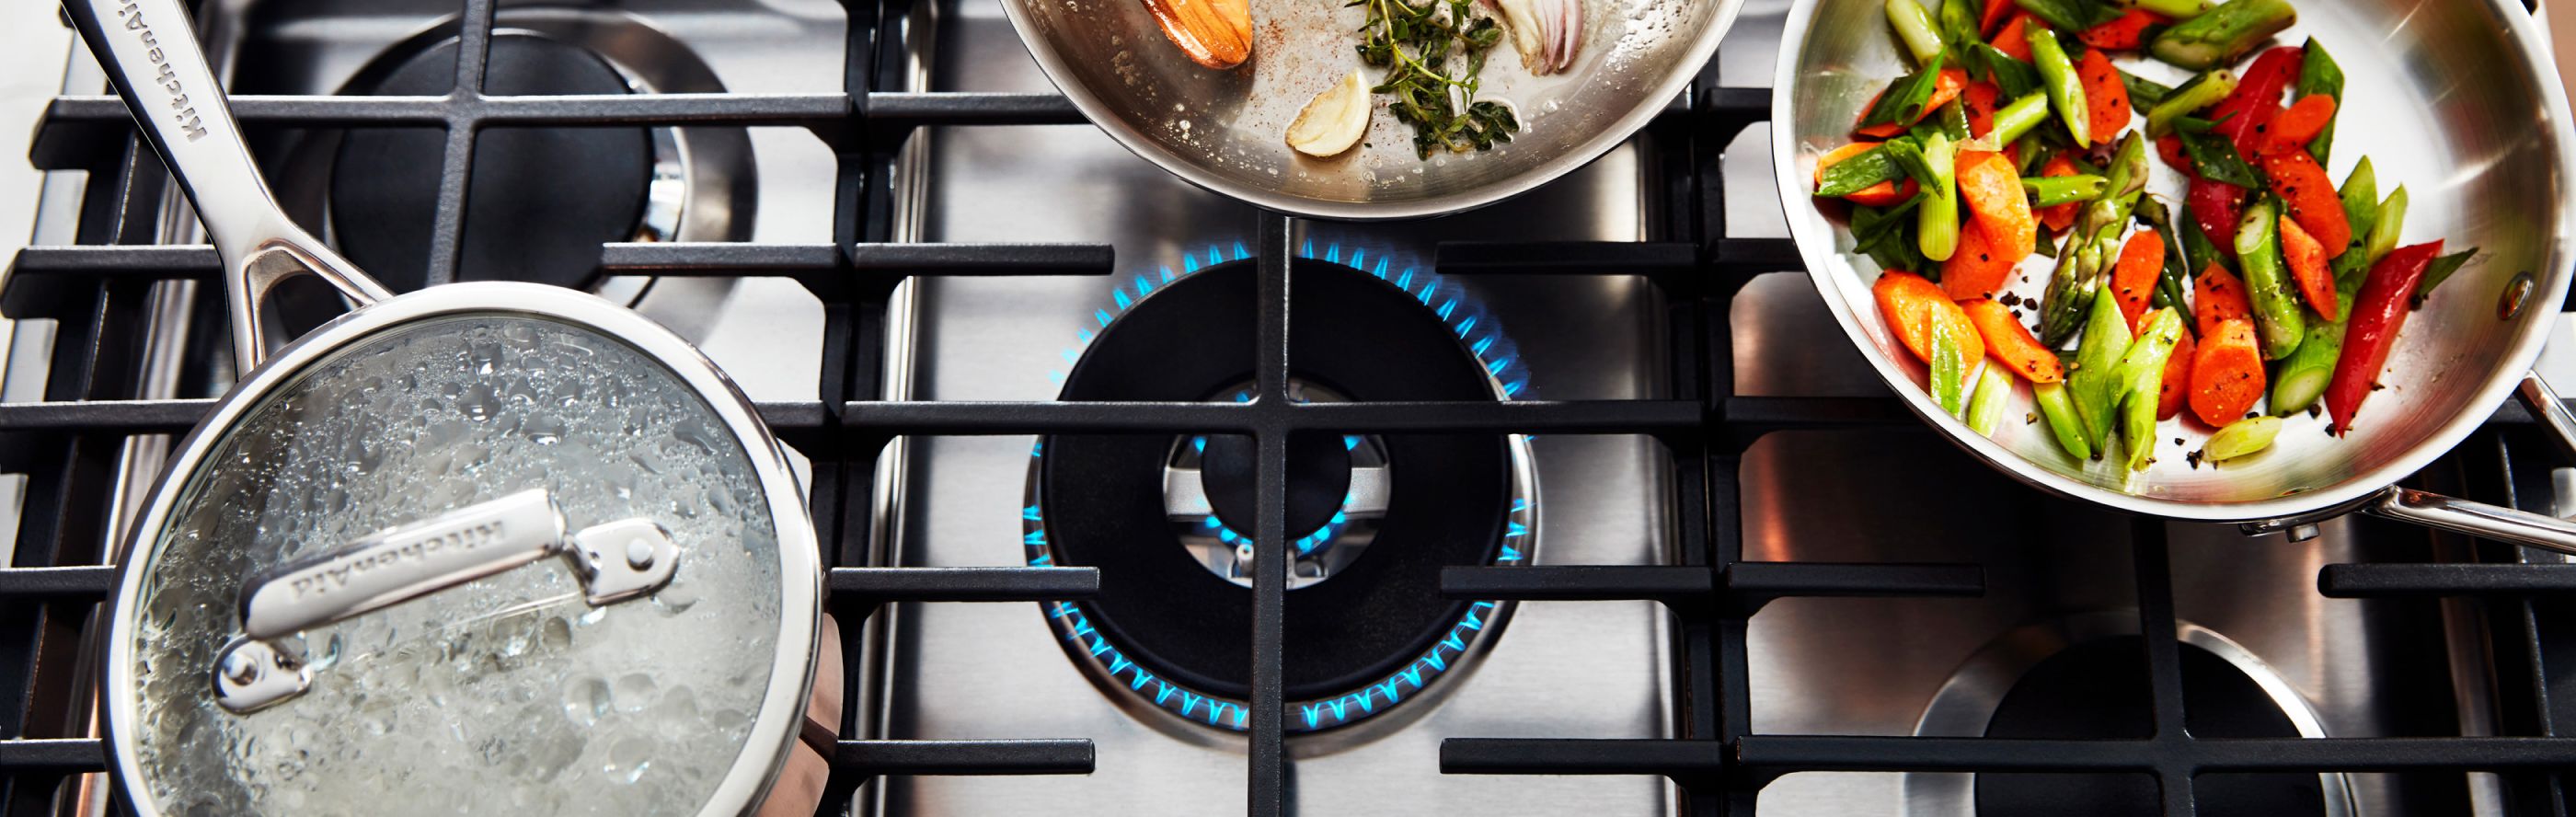 Gas stovetop with lit burner and several pots and pans sautéing food